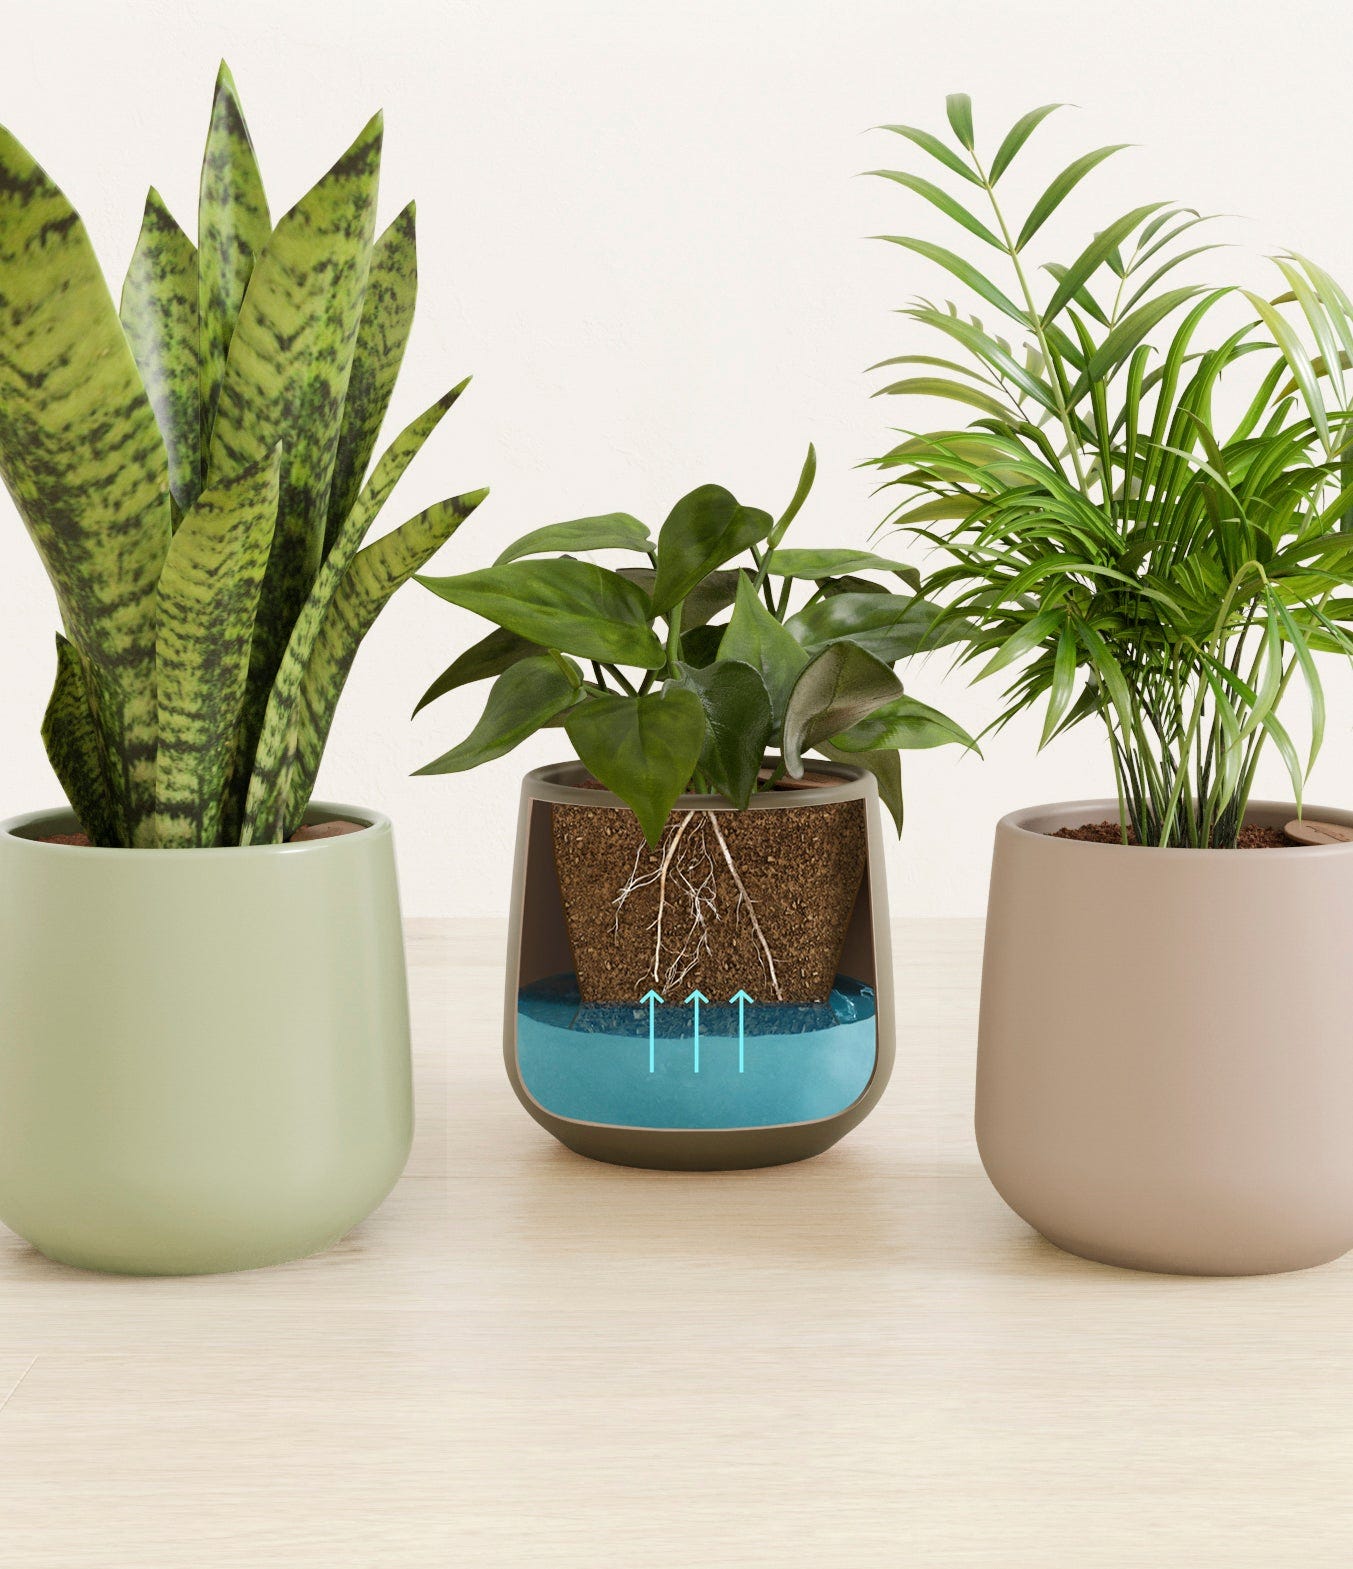 Self Watering Plant Collections & Bundles | easyplant